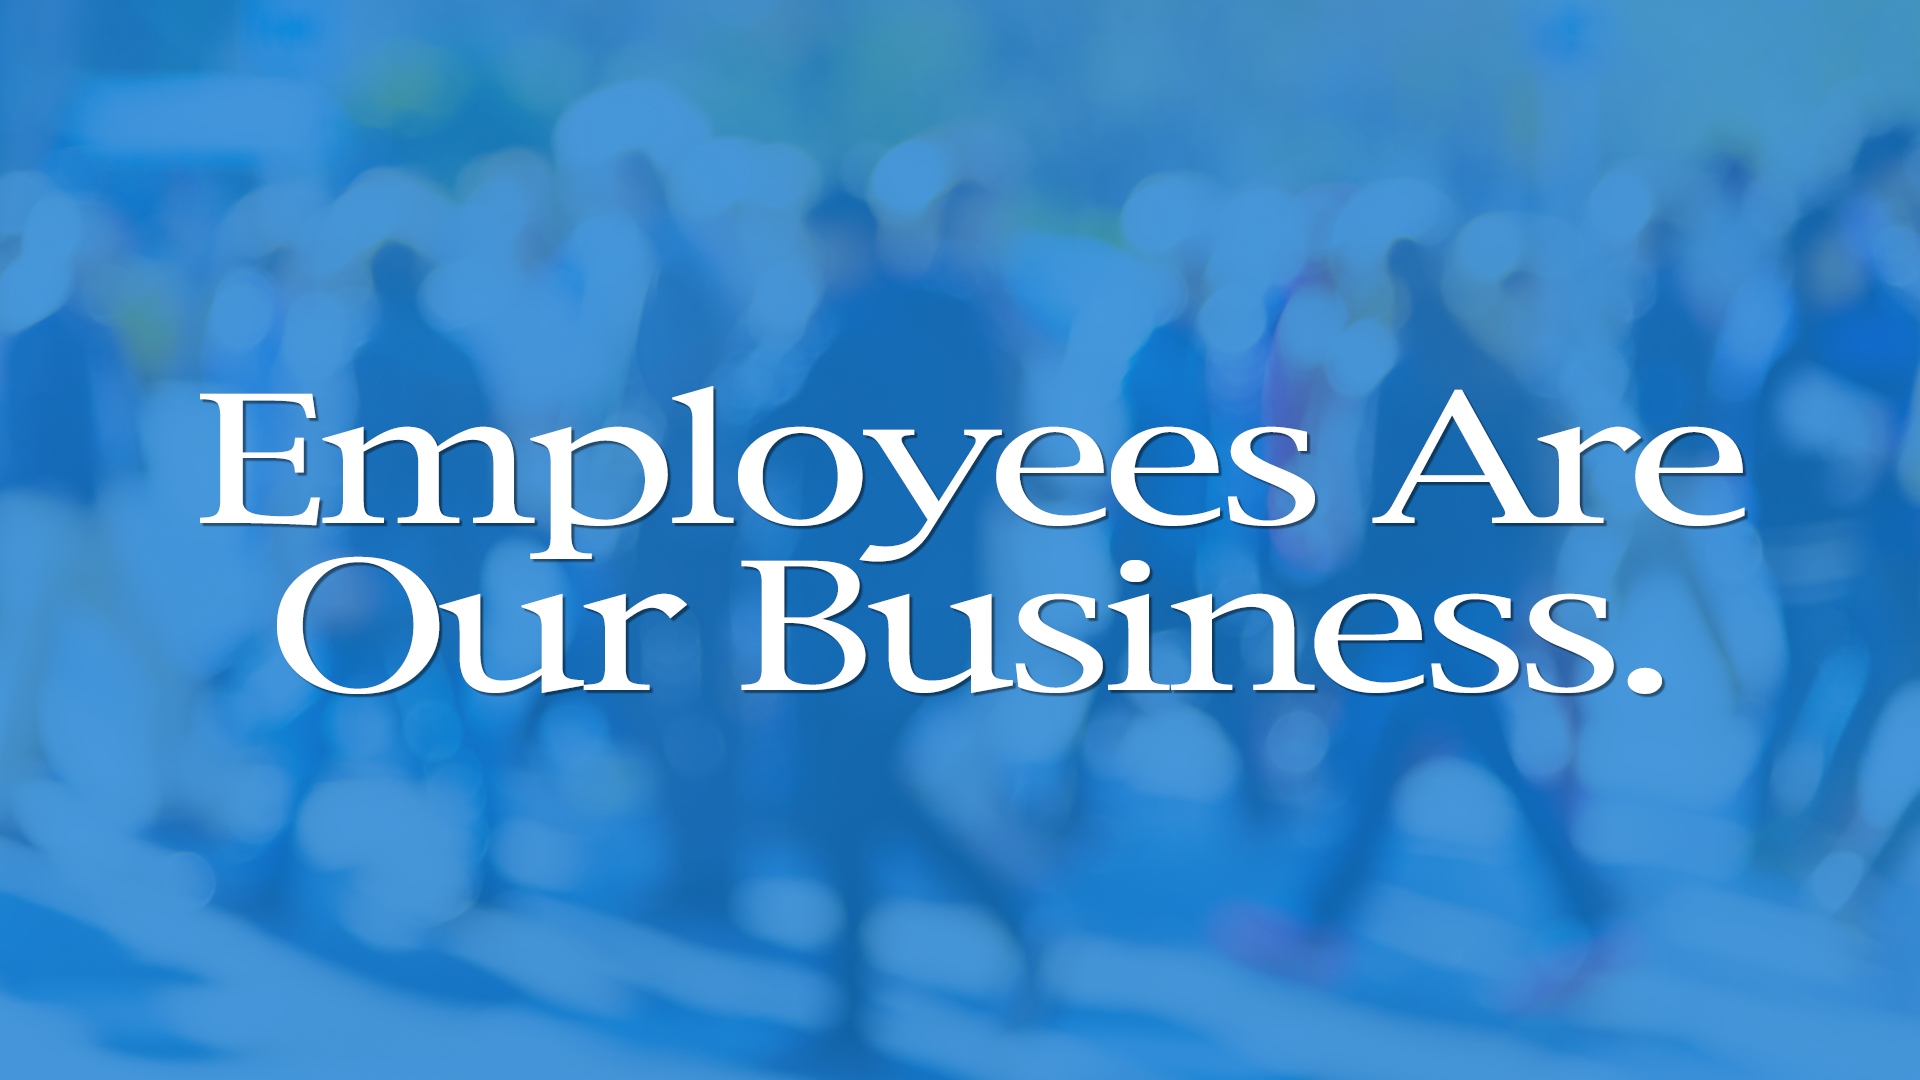 Employees Are Our Business